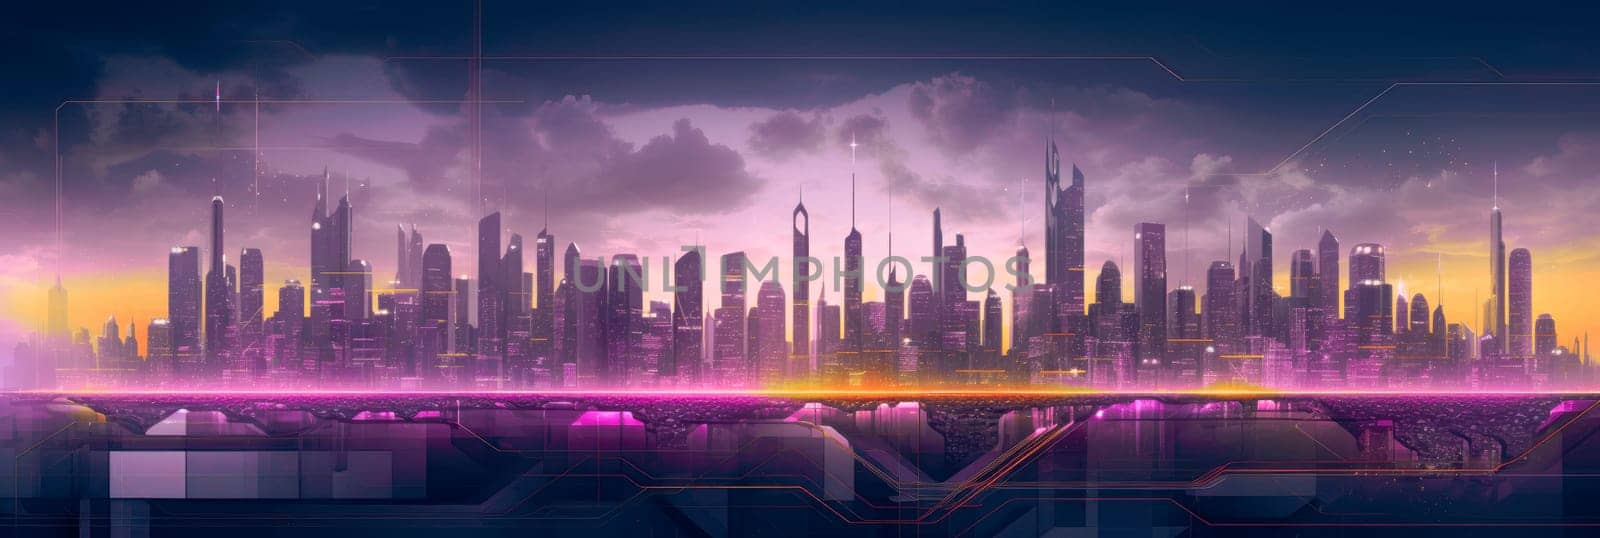 Abstract futuristic night city, Concept for IOT, smart city by biancoblue